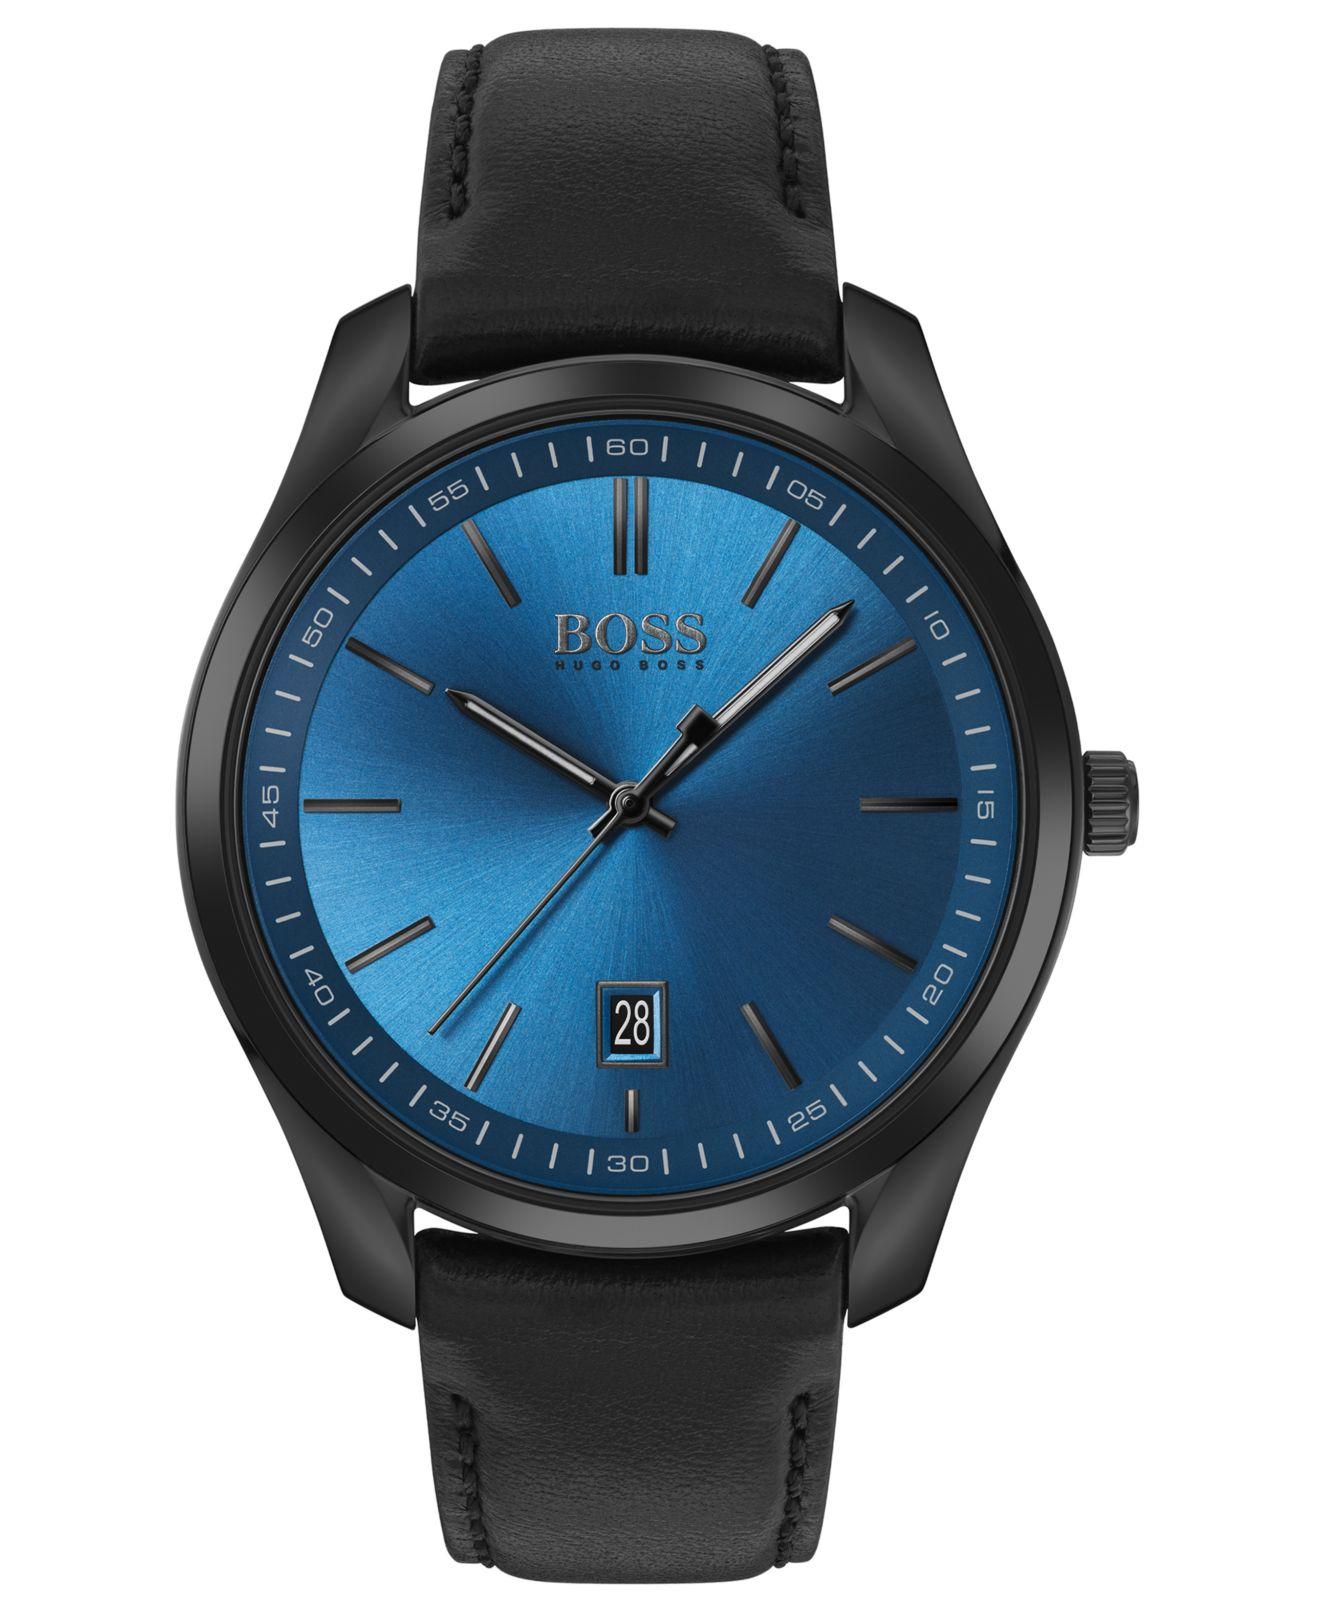 BOSS by Hugo Boss Leather Black-plated Watch With Blue Sunray-brushed ...